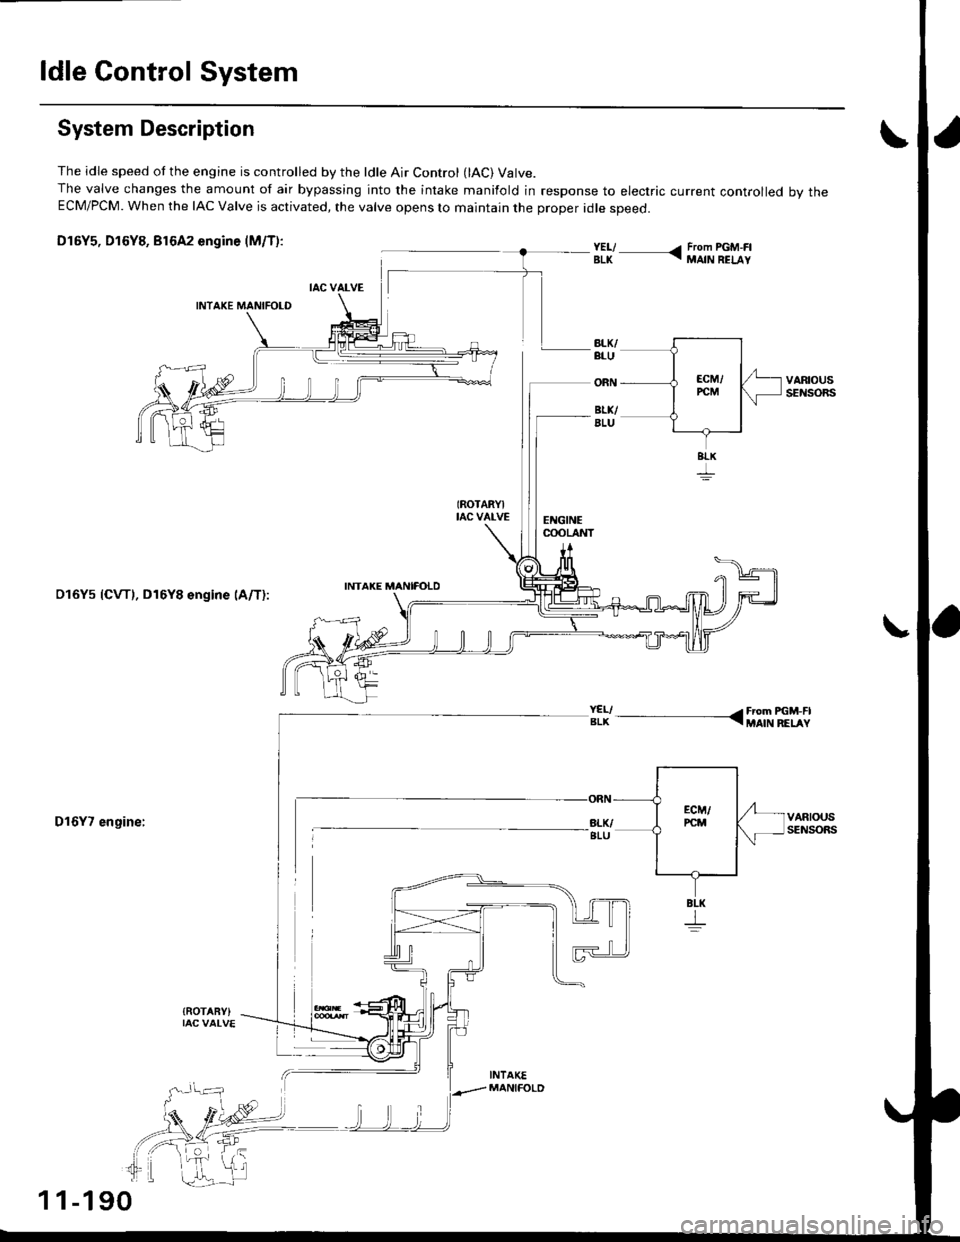 HONDA CIVIC 1996 6.G Workshop Manual ldle Control System
System Description
The idle speed ot the engine is controlled by the ldle Air Control (lAC) Valve.The valve changes the amount of air bypassing into the intake manifold in response